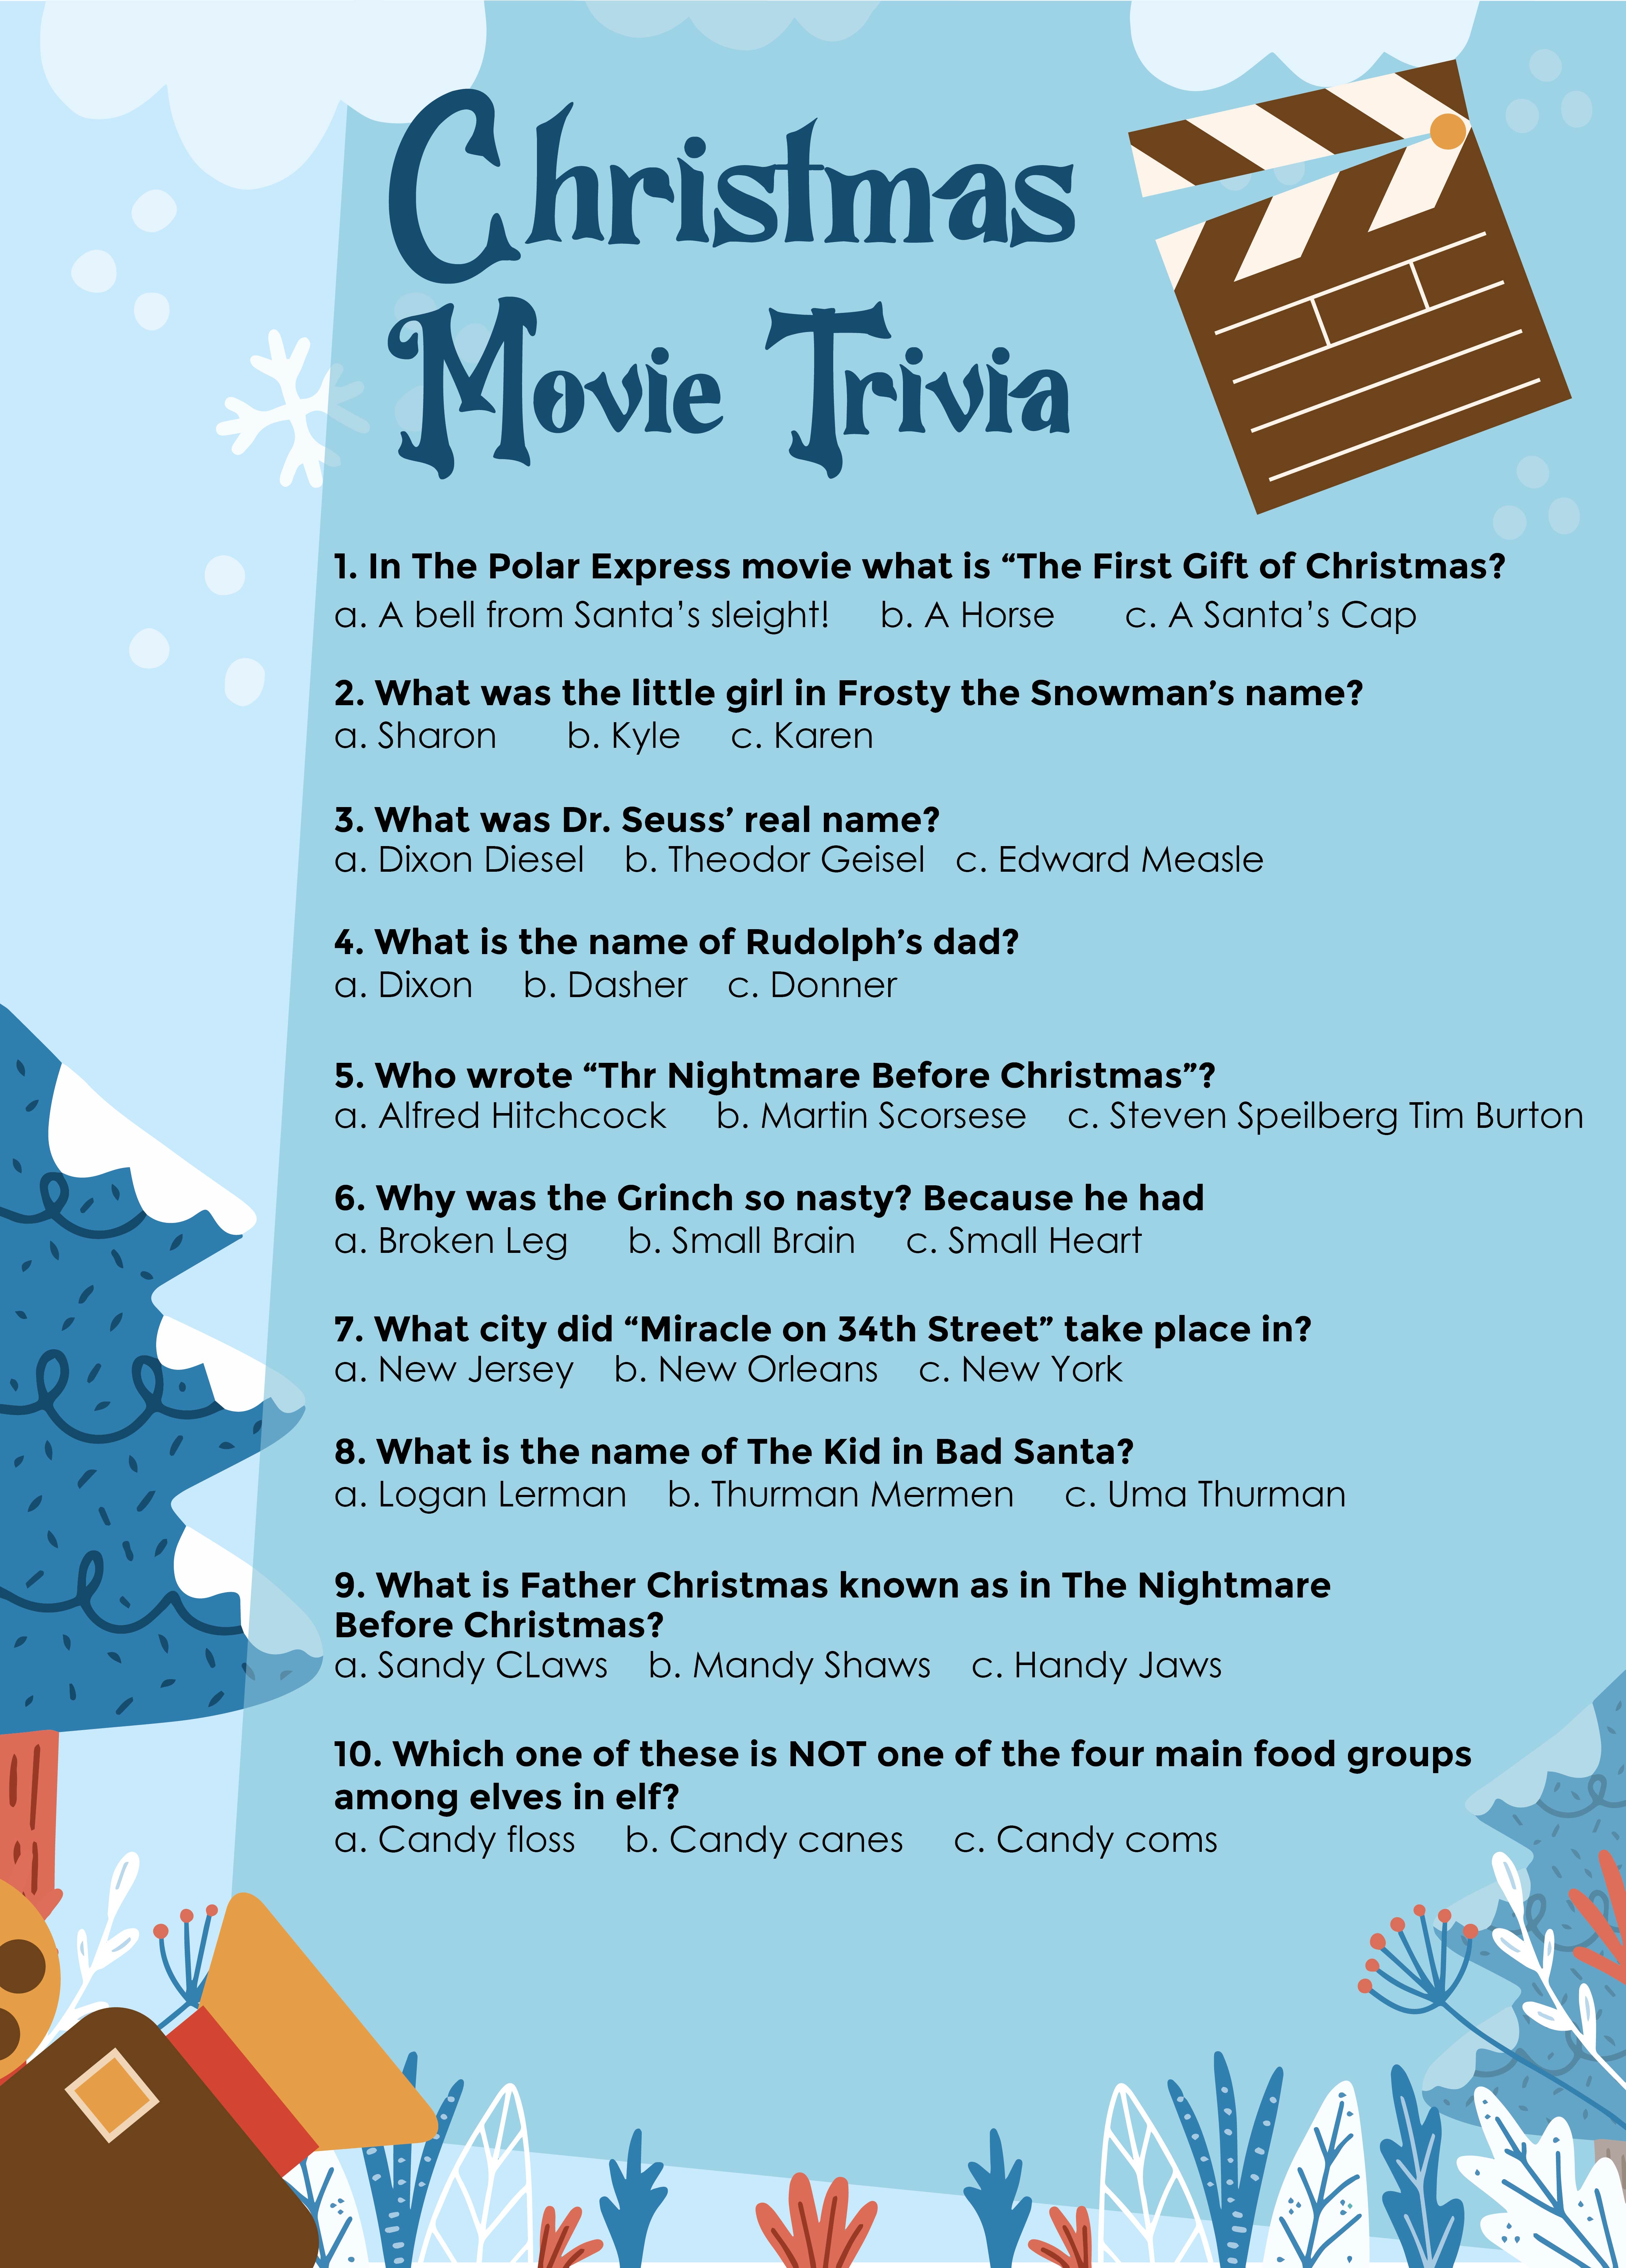 christmas movie quotes trivia questions and answers